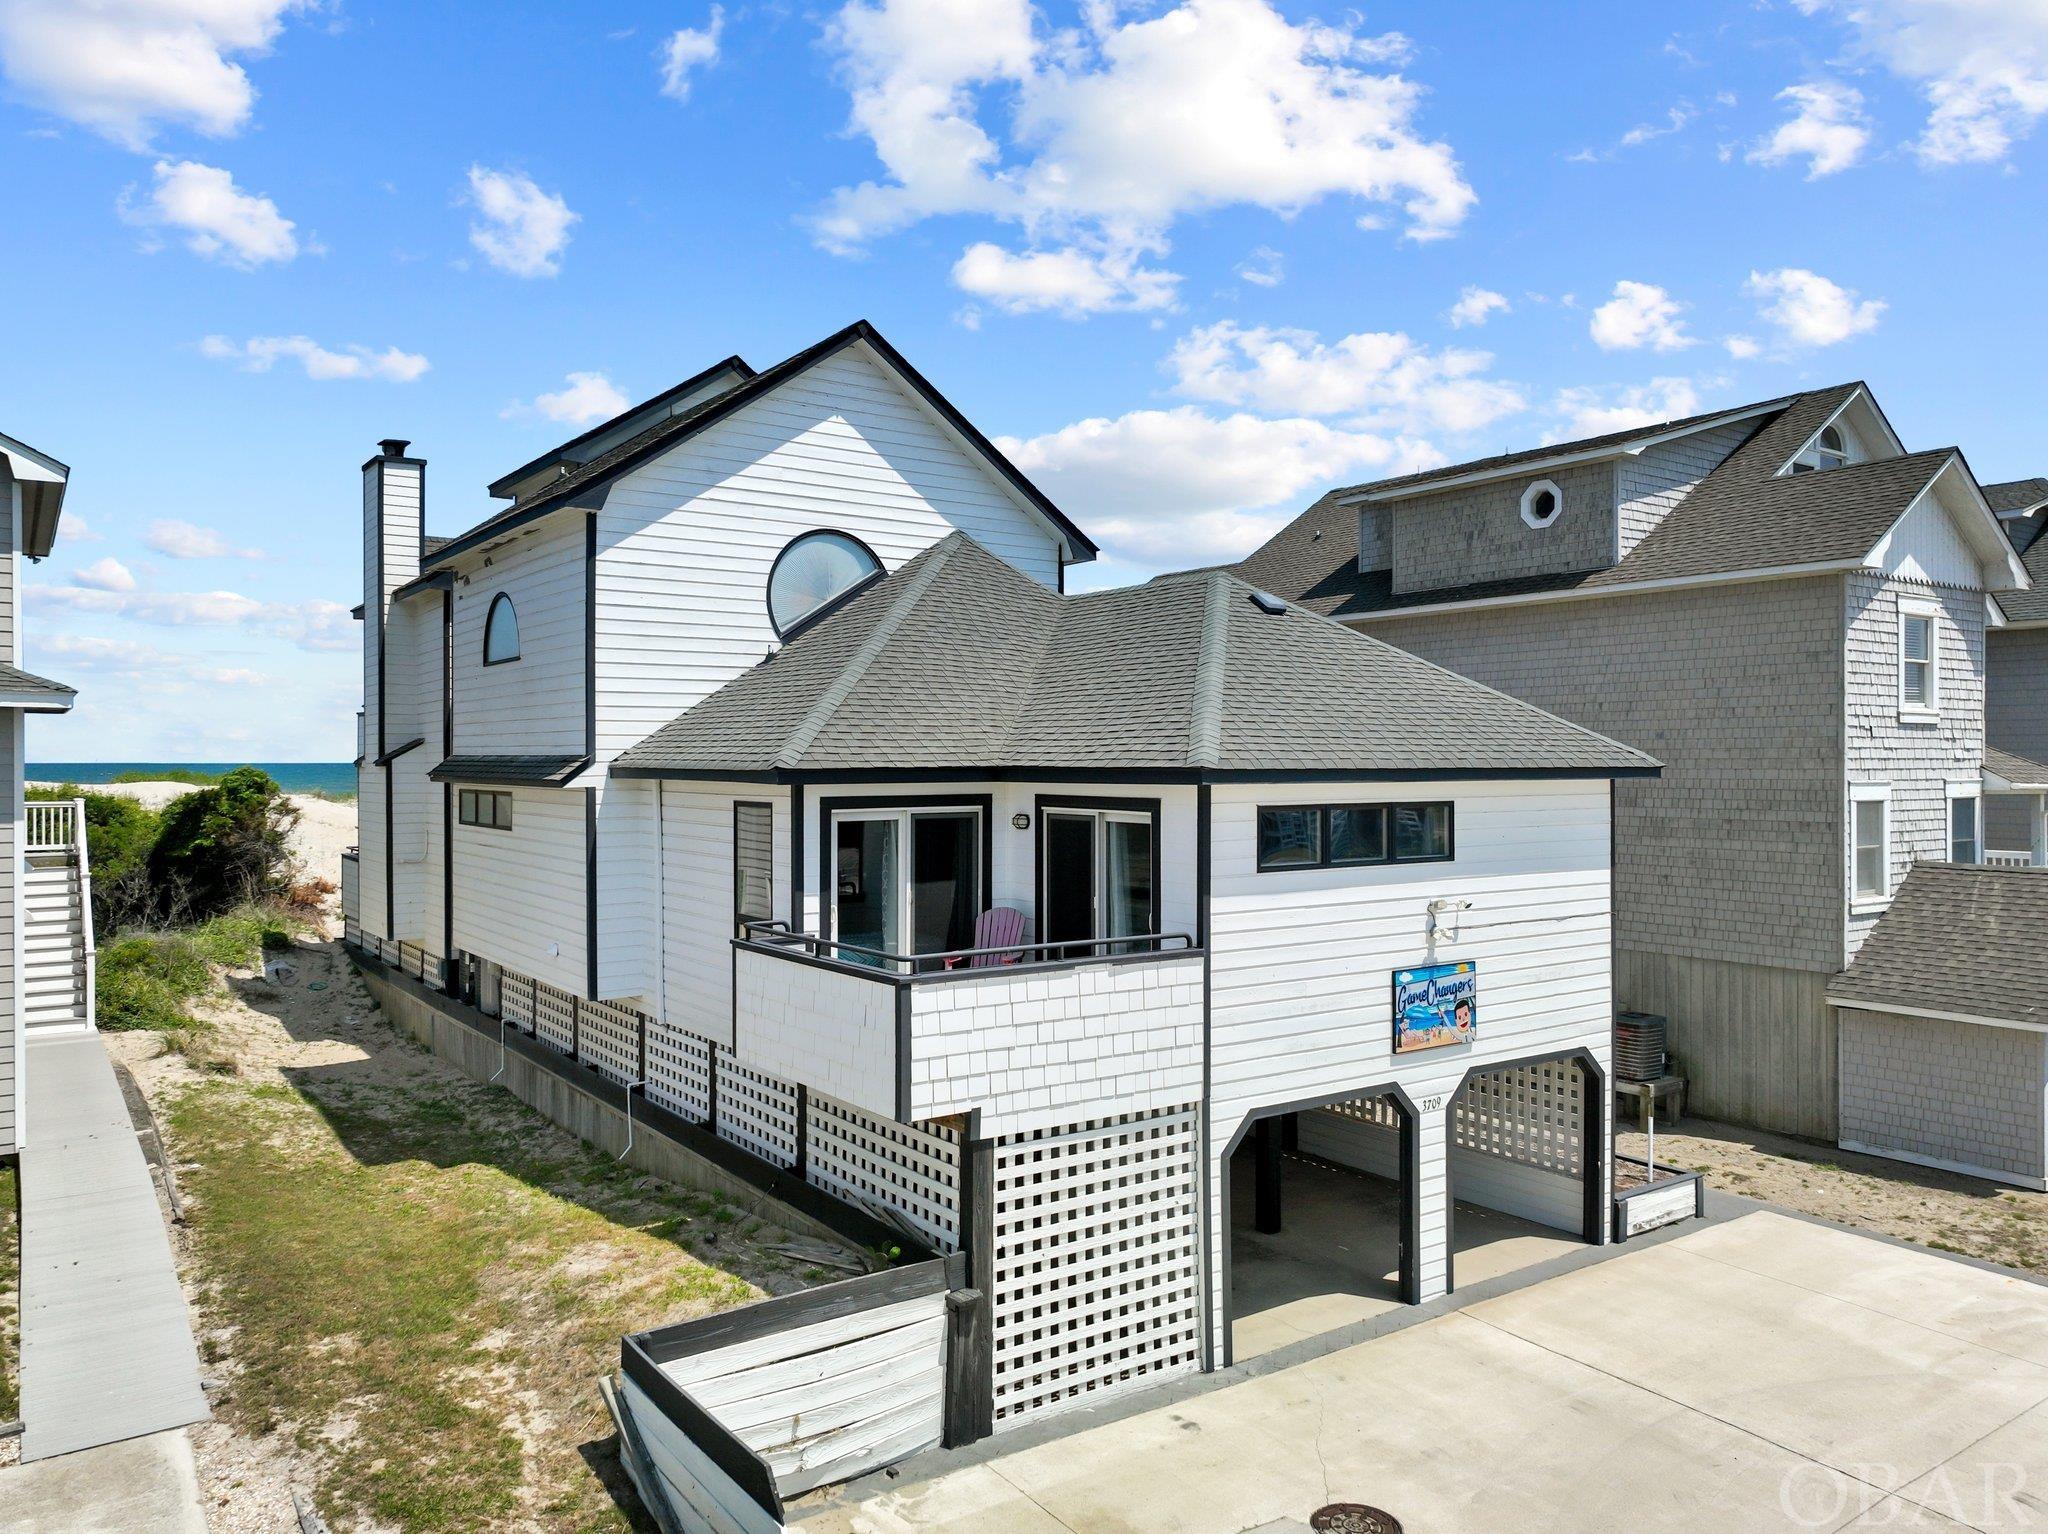 With an incredible $225K remodel done this offseason, get ready to be wowed by this oceanfront stunner.  Showing as one of the best in one of the most desirable locations on our beach not far from the legendary Millionaires row of Nags Head.  With six well-appointed bedrooms, this home has plenty of space to make memories with the entire family. The two top level masters offer additional privacy away from the other bedrooms and living spaces. The Ocean facing Master has breathtaking views with a private deck access. The west facing master offers another spacious sleeping quarter and has it’s own views of Jockey’s Ridge. The loft (very top level) has been repurposed into an arcade room that will keep the kids entertained for hours! The remaining four bedrooms are located on the main living area. With fresh flooring throughout and new TVs in all bedrooms, the bedrooms are set up for relaxation & rest after a long day at the beach. The renovated kitchen is perfect for entertaining and preparing meals with stainless appliances throughout. The kitchen area opens up to the main living space that has a fresh new look with updated decor, new furniture and reclaimed wood that shouts, "coastal chic." The wood burning fire-place is a favorite among all that visit whether it being friends, family or guest. Sporting a wet bar & a separate sitting space facing the ocean, this level of the home has something for everyone. With a new private walkway from the house to the beach, accessibility to the ocean is easy (for all ages). There is a clean, dry entry with plenty of parking for everyone.   Speaking of locale, "Game Changer" is located walking to some of the freshest seafood on the Outer Banks! Almost directly across from Jockey's Ridge, Kitty Hawk Kites and legendary Austin’s Seafood this spot is located in the heart of Nags Head and all the activities it has to offer. In fact, the local YMCA sits less than a mile away with indoor/outdoor pools, full weight room and complimentary passes for the remainder of 2023. Plain & simple, with it's location and recent upgrades, this home is set up for high ROI and is highly marketable for rentals due to those important factors.  Interior Upgrades: Whole house paint. New luxury vinyl tile floor.  Full kitchen upgrade with granite and new cabinetry as well as appliances.   New living and bedroom furniture.  New smart TVs. New LED lighting throughout. New window blinds & ceiling fans.  New Plumbing, New HVAC.   Upgrades: New Hot Tub, Driveway renovation, New Decks, Renovated Kitchen, Bedrooms and Bathrooms.  See Associated docs for full list.